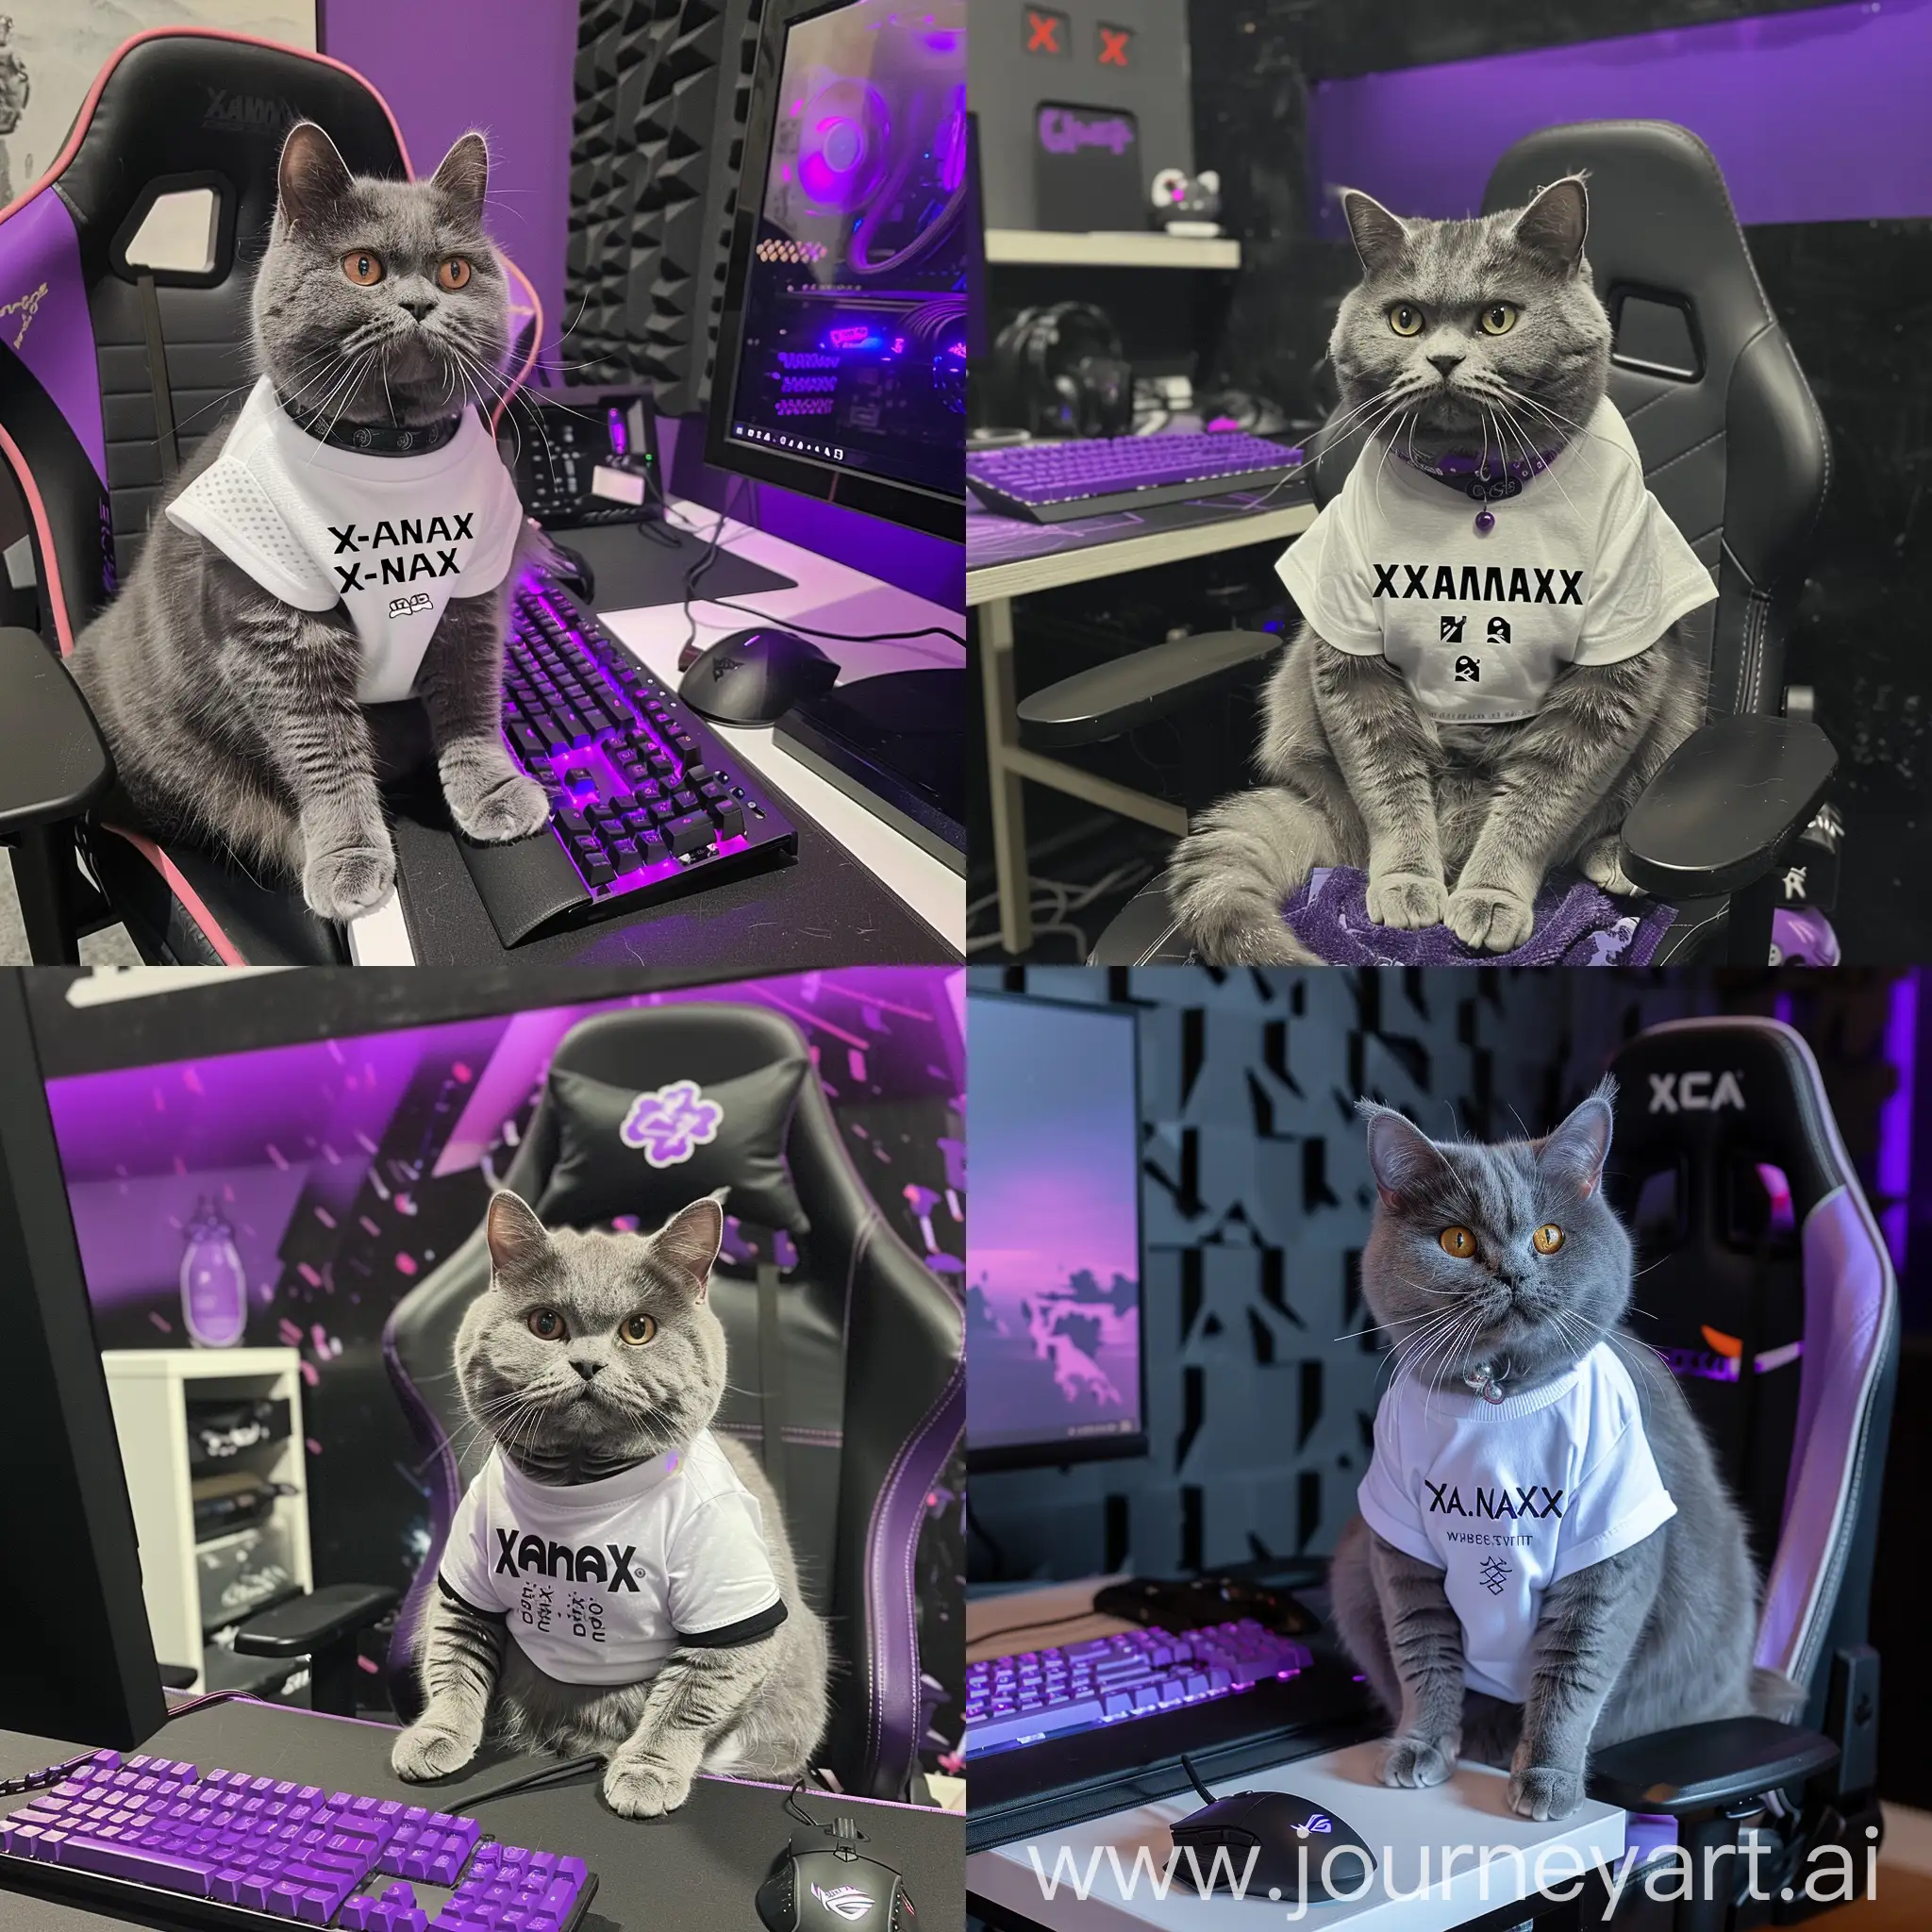 A gray cat of the British breed sits on a computer chair at a table on which there is a purple keyboard and a black gaming mouse , behind the cat there is a black and purple wall , the cat is dressed in a white T-shirt with , xanax-x-a-n-a-x , written in the center